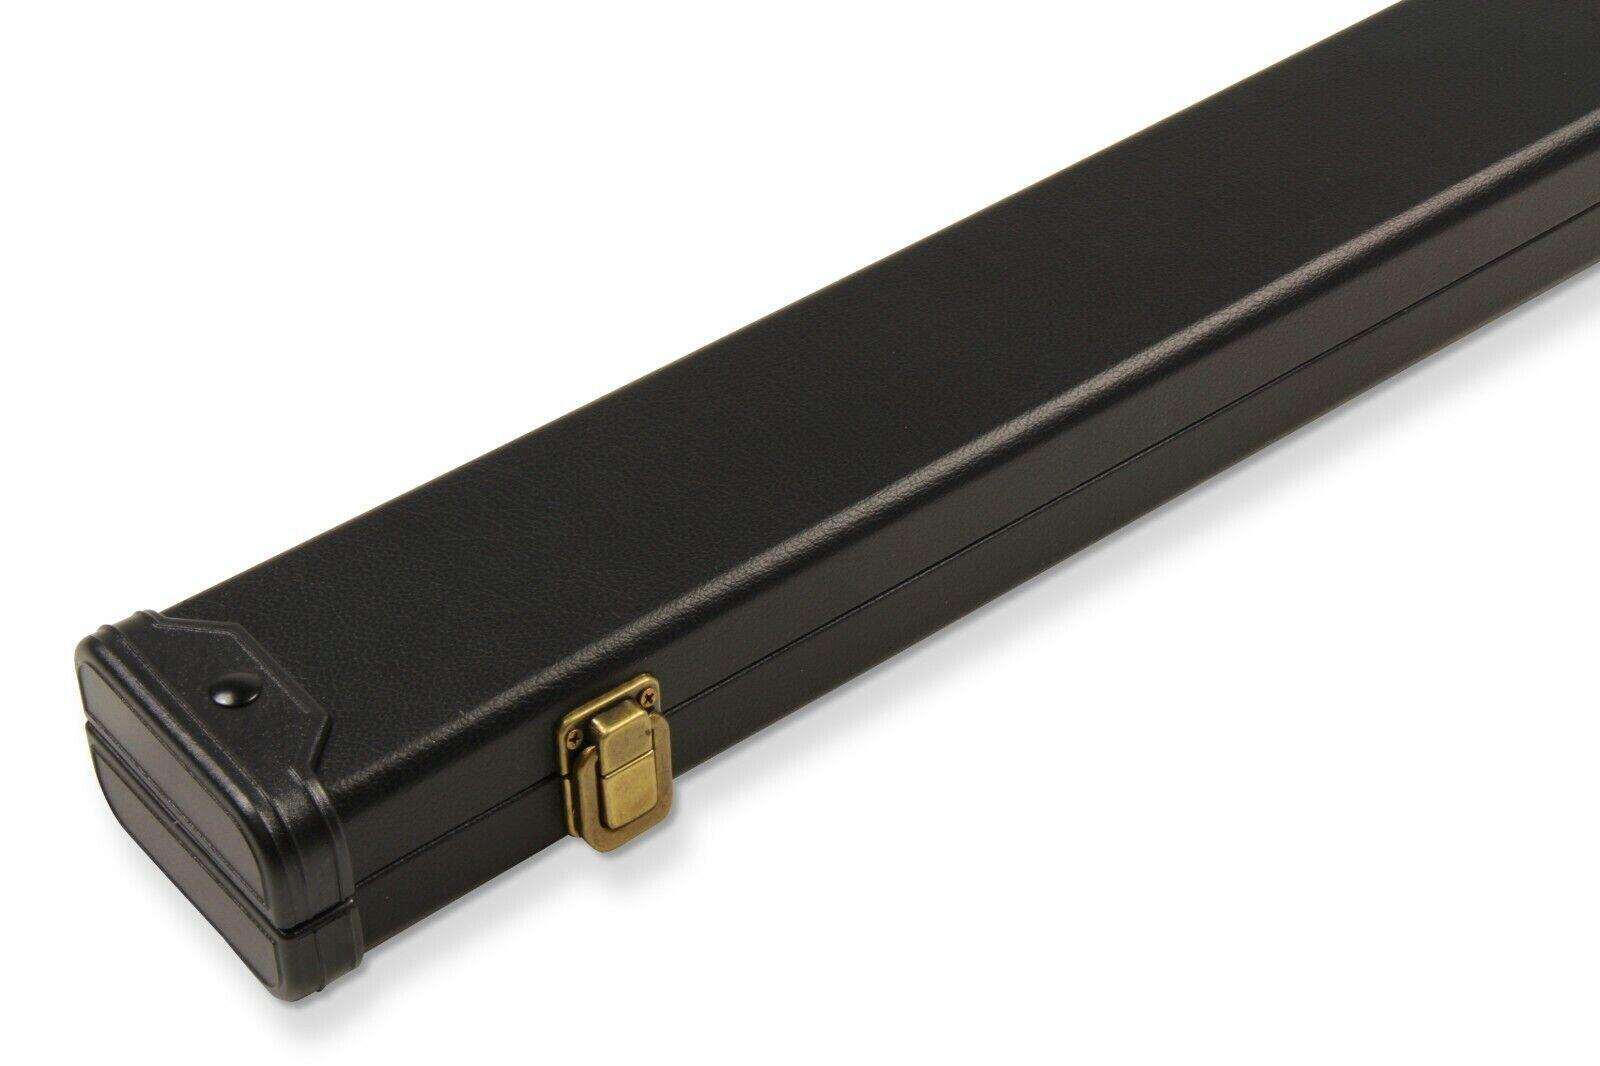 PLAIN BLACK Hard 3/4 Cue Case Holds 3/4 Jointed 3pc Snooker Pool Cue 5/7